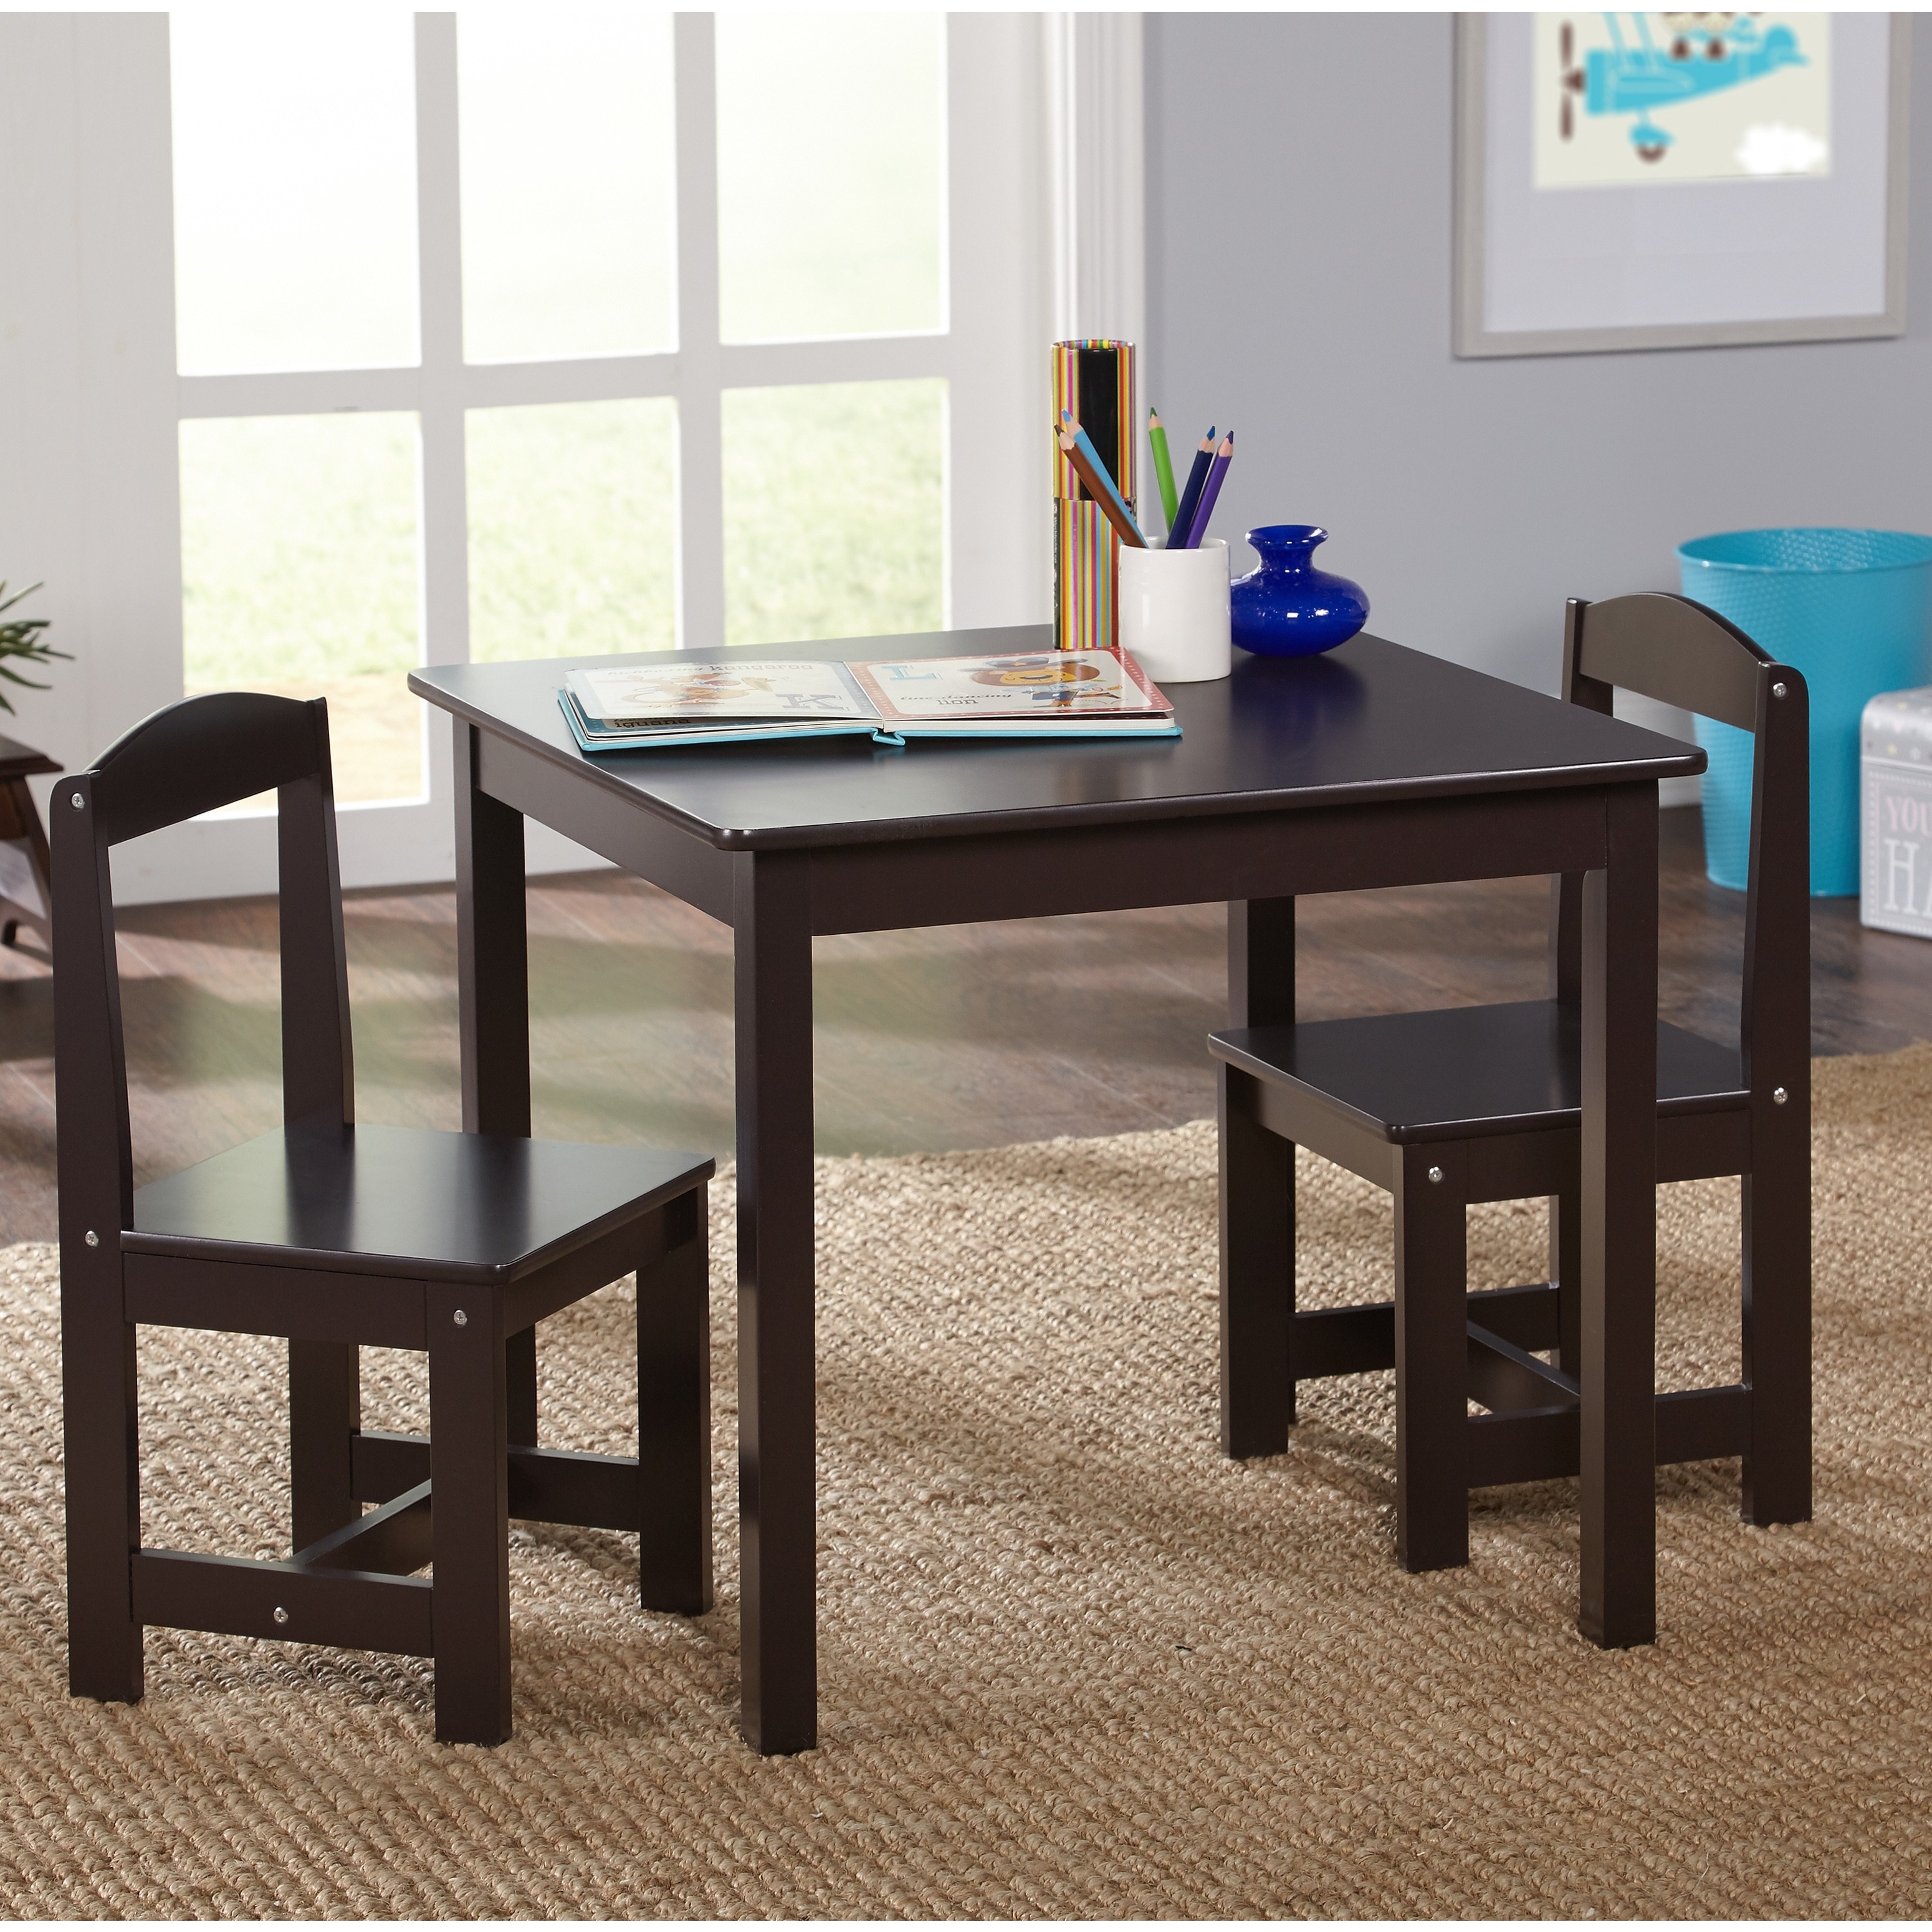 espresso childrens table and chairs